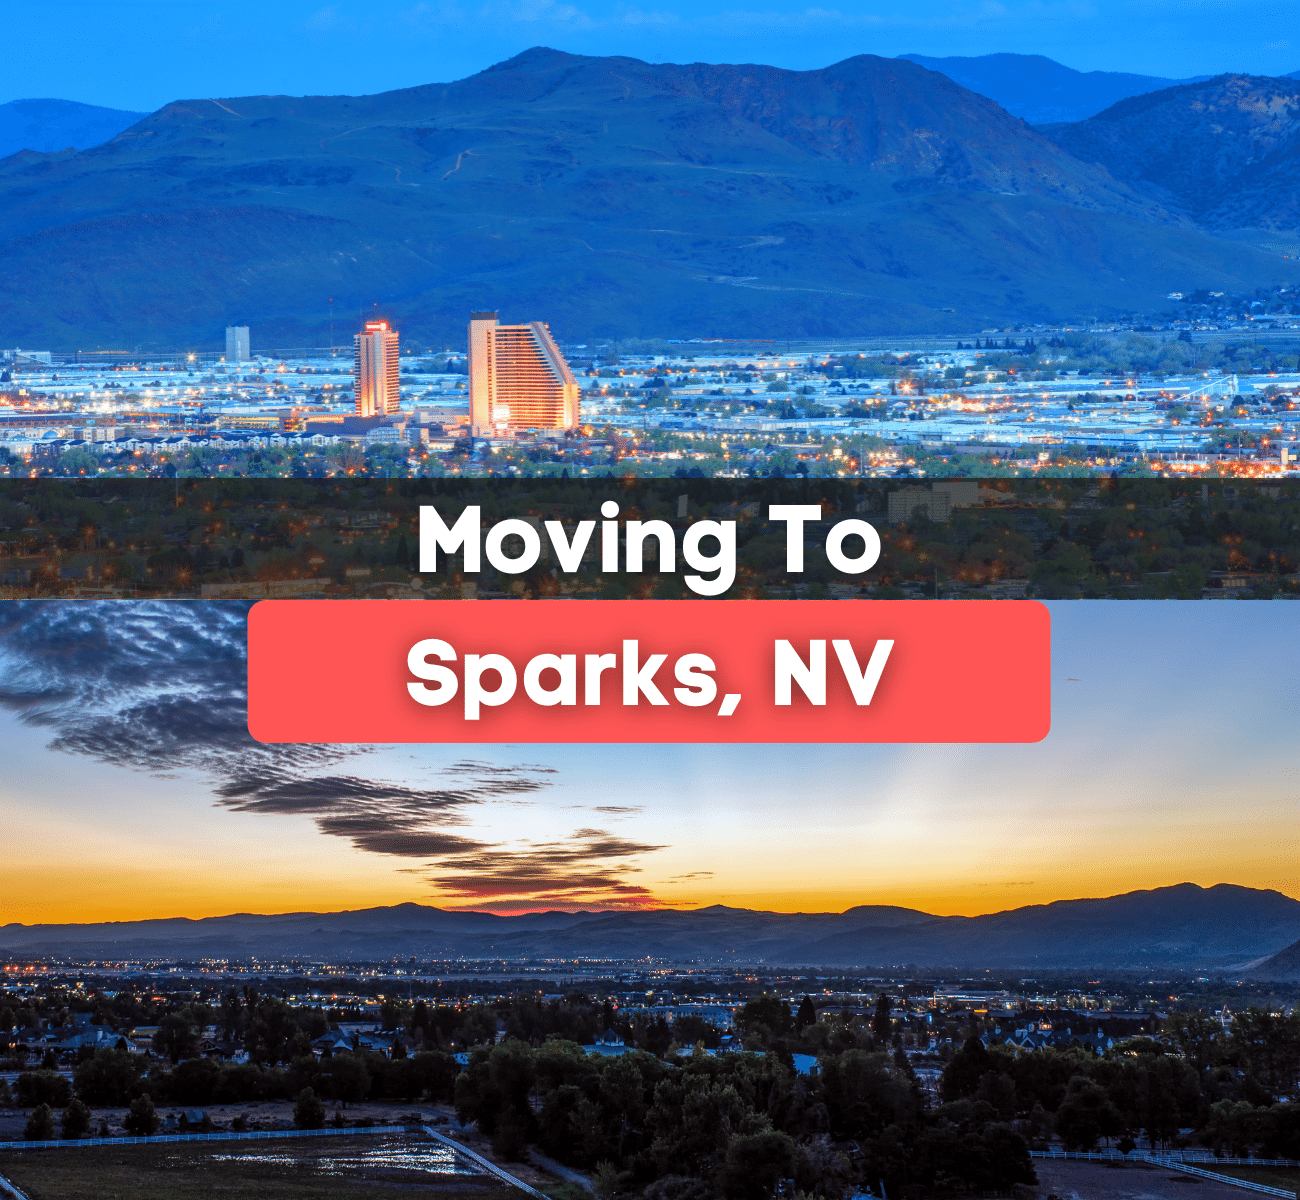 The city of Sparks, NV during the sunset 